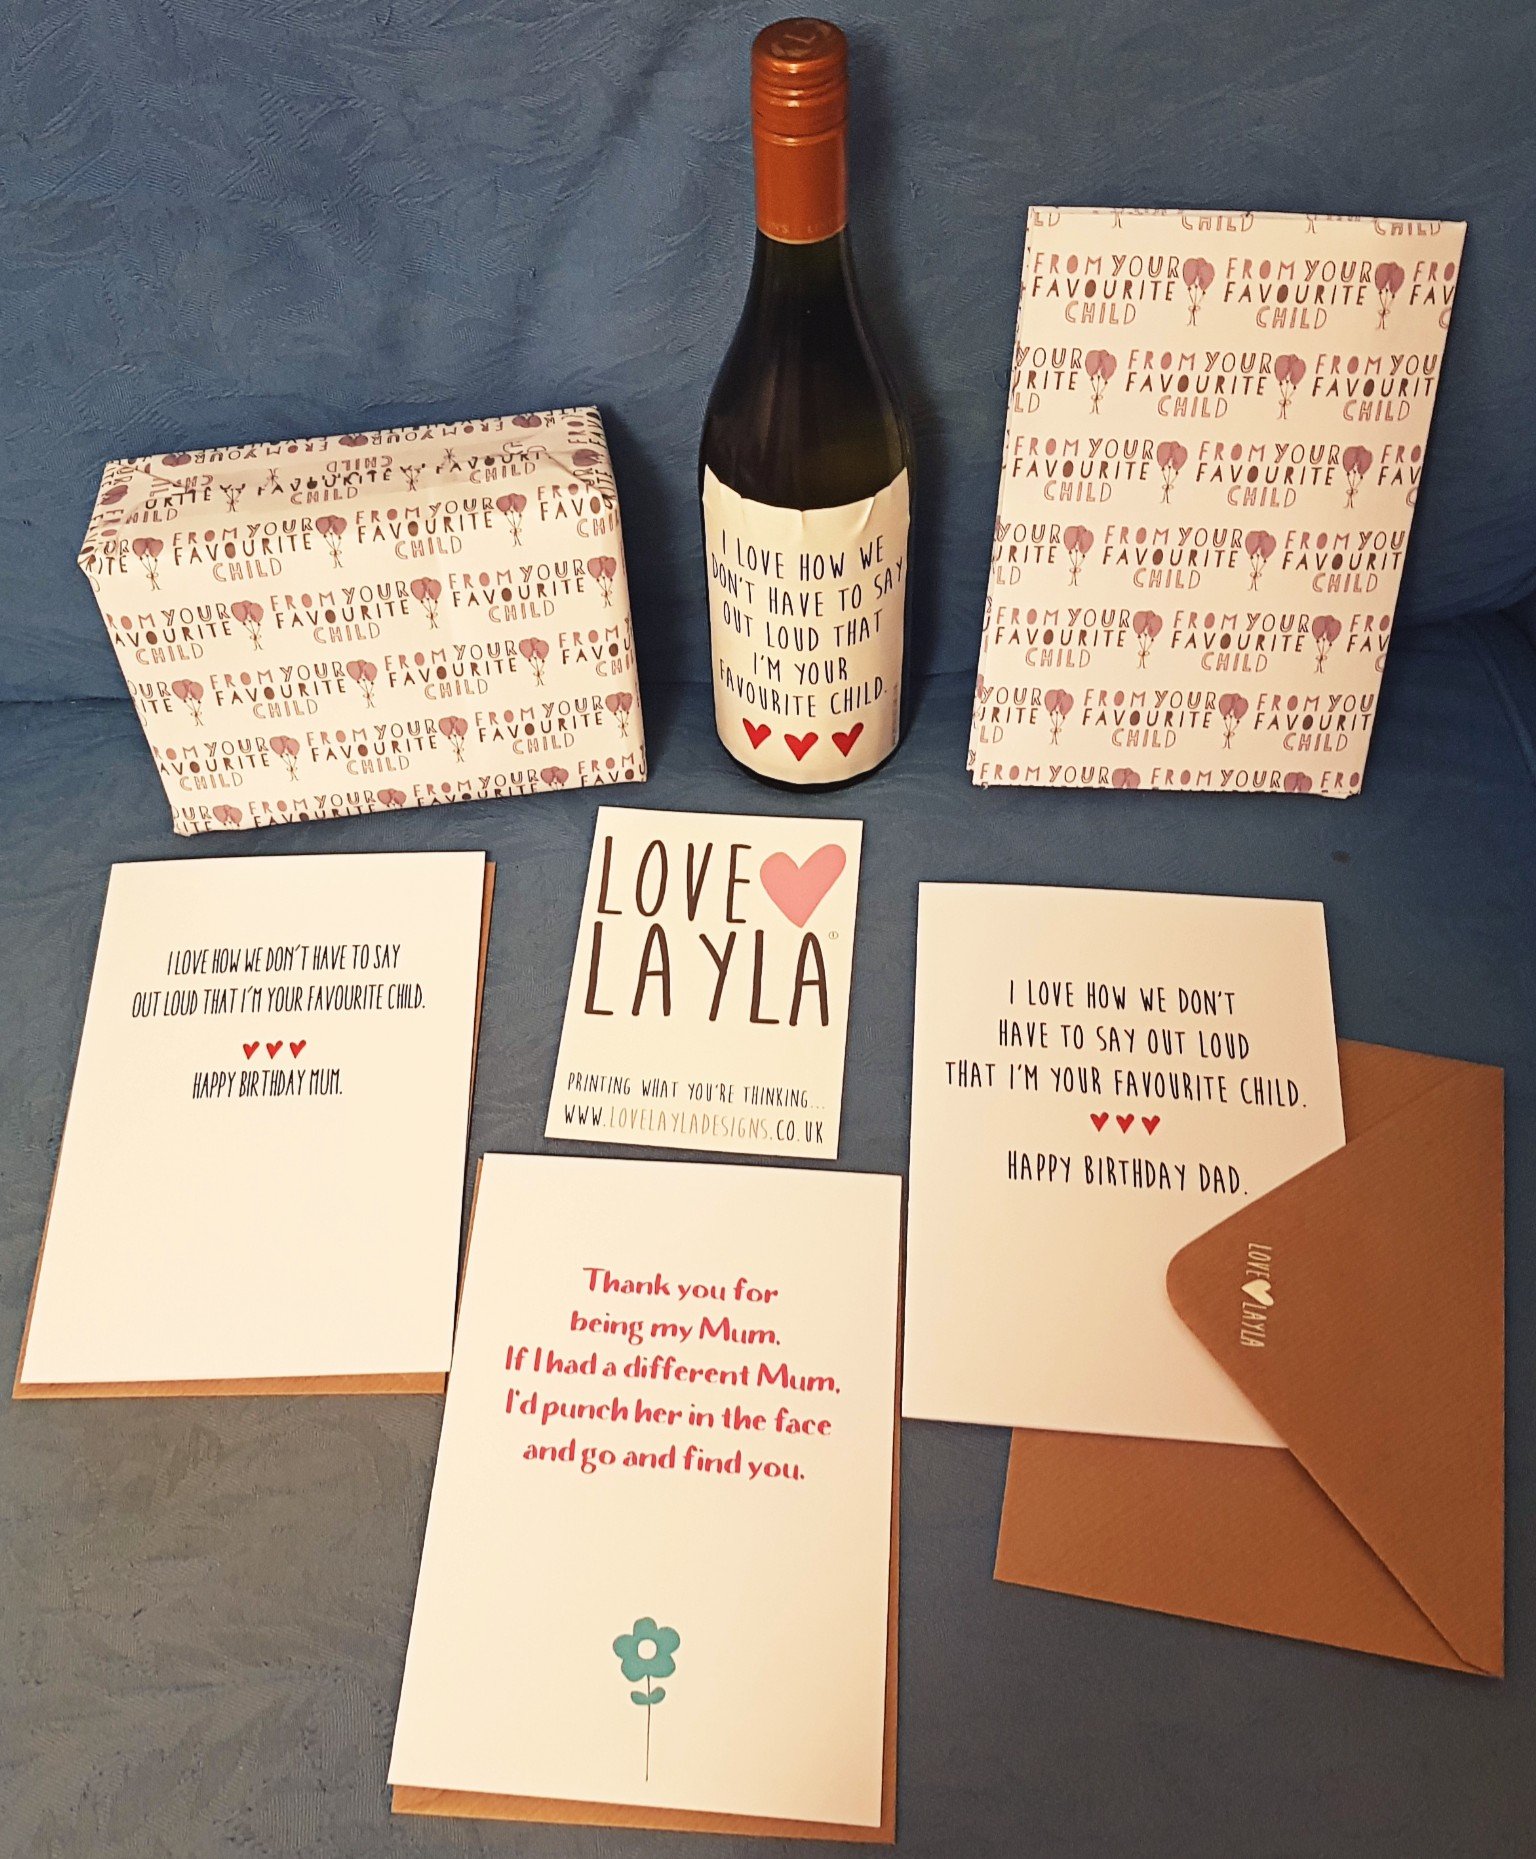 Love Layla greetings cards, wine label and wrapping paper.